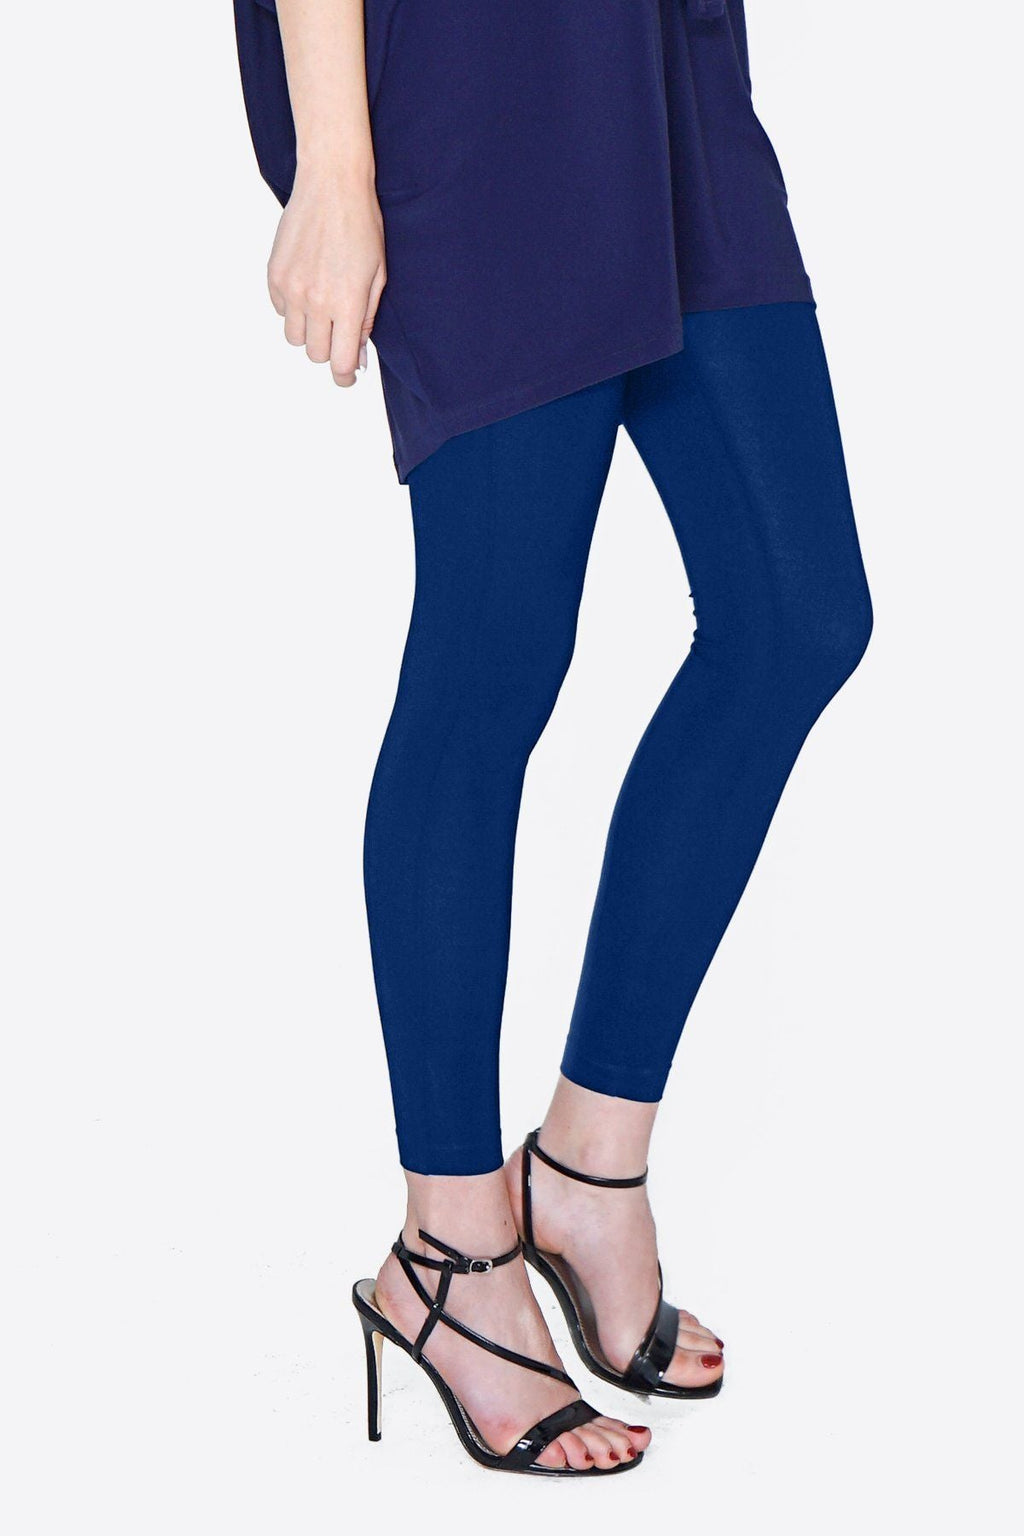 Women's Blue Leggings Pants for work, office, business, casual days